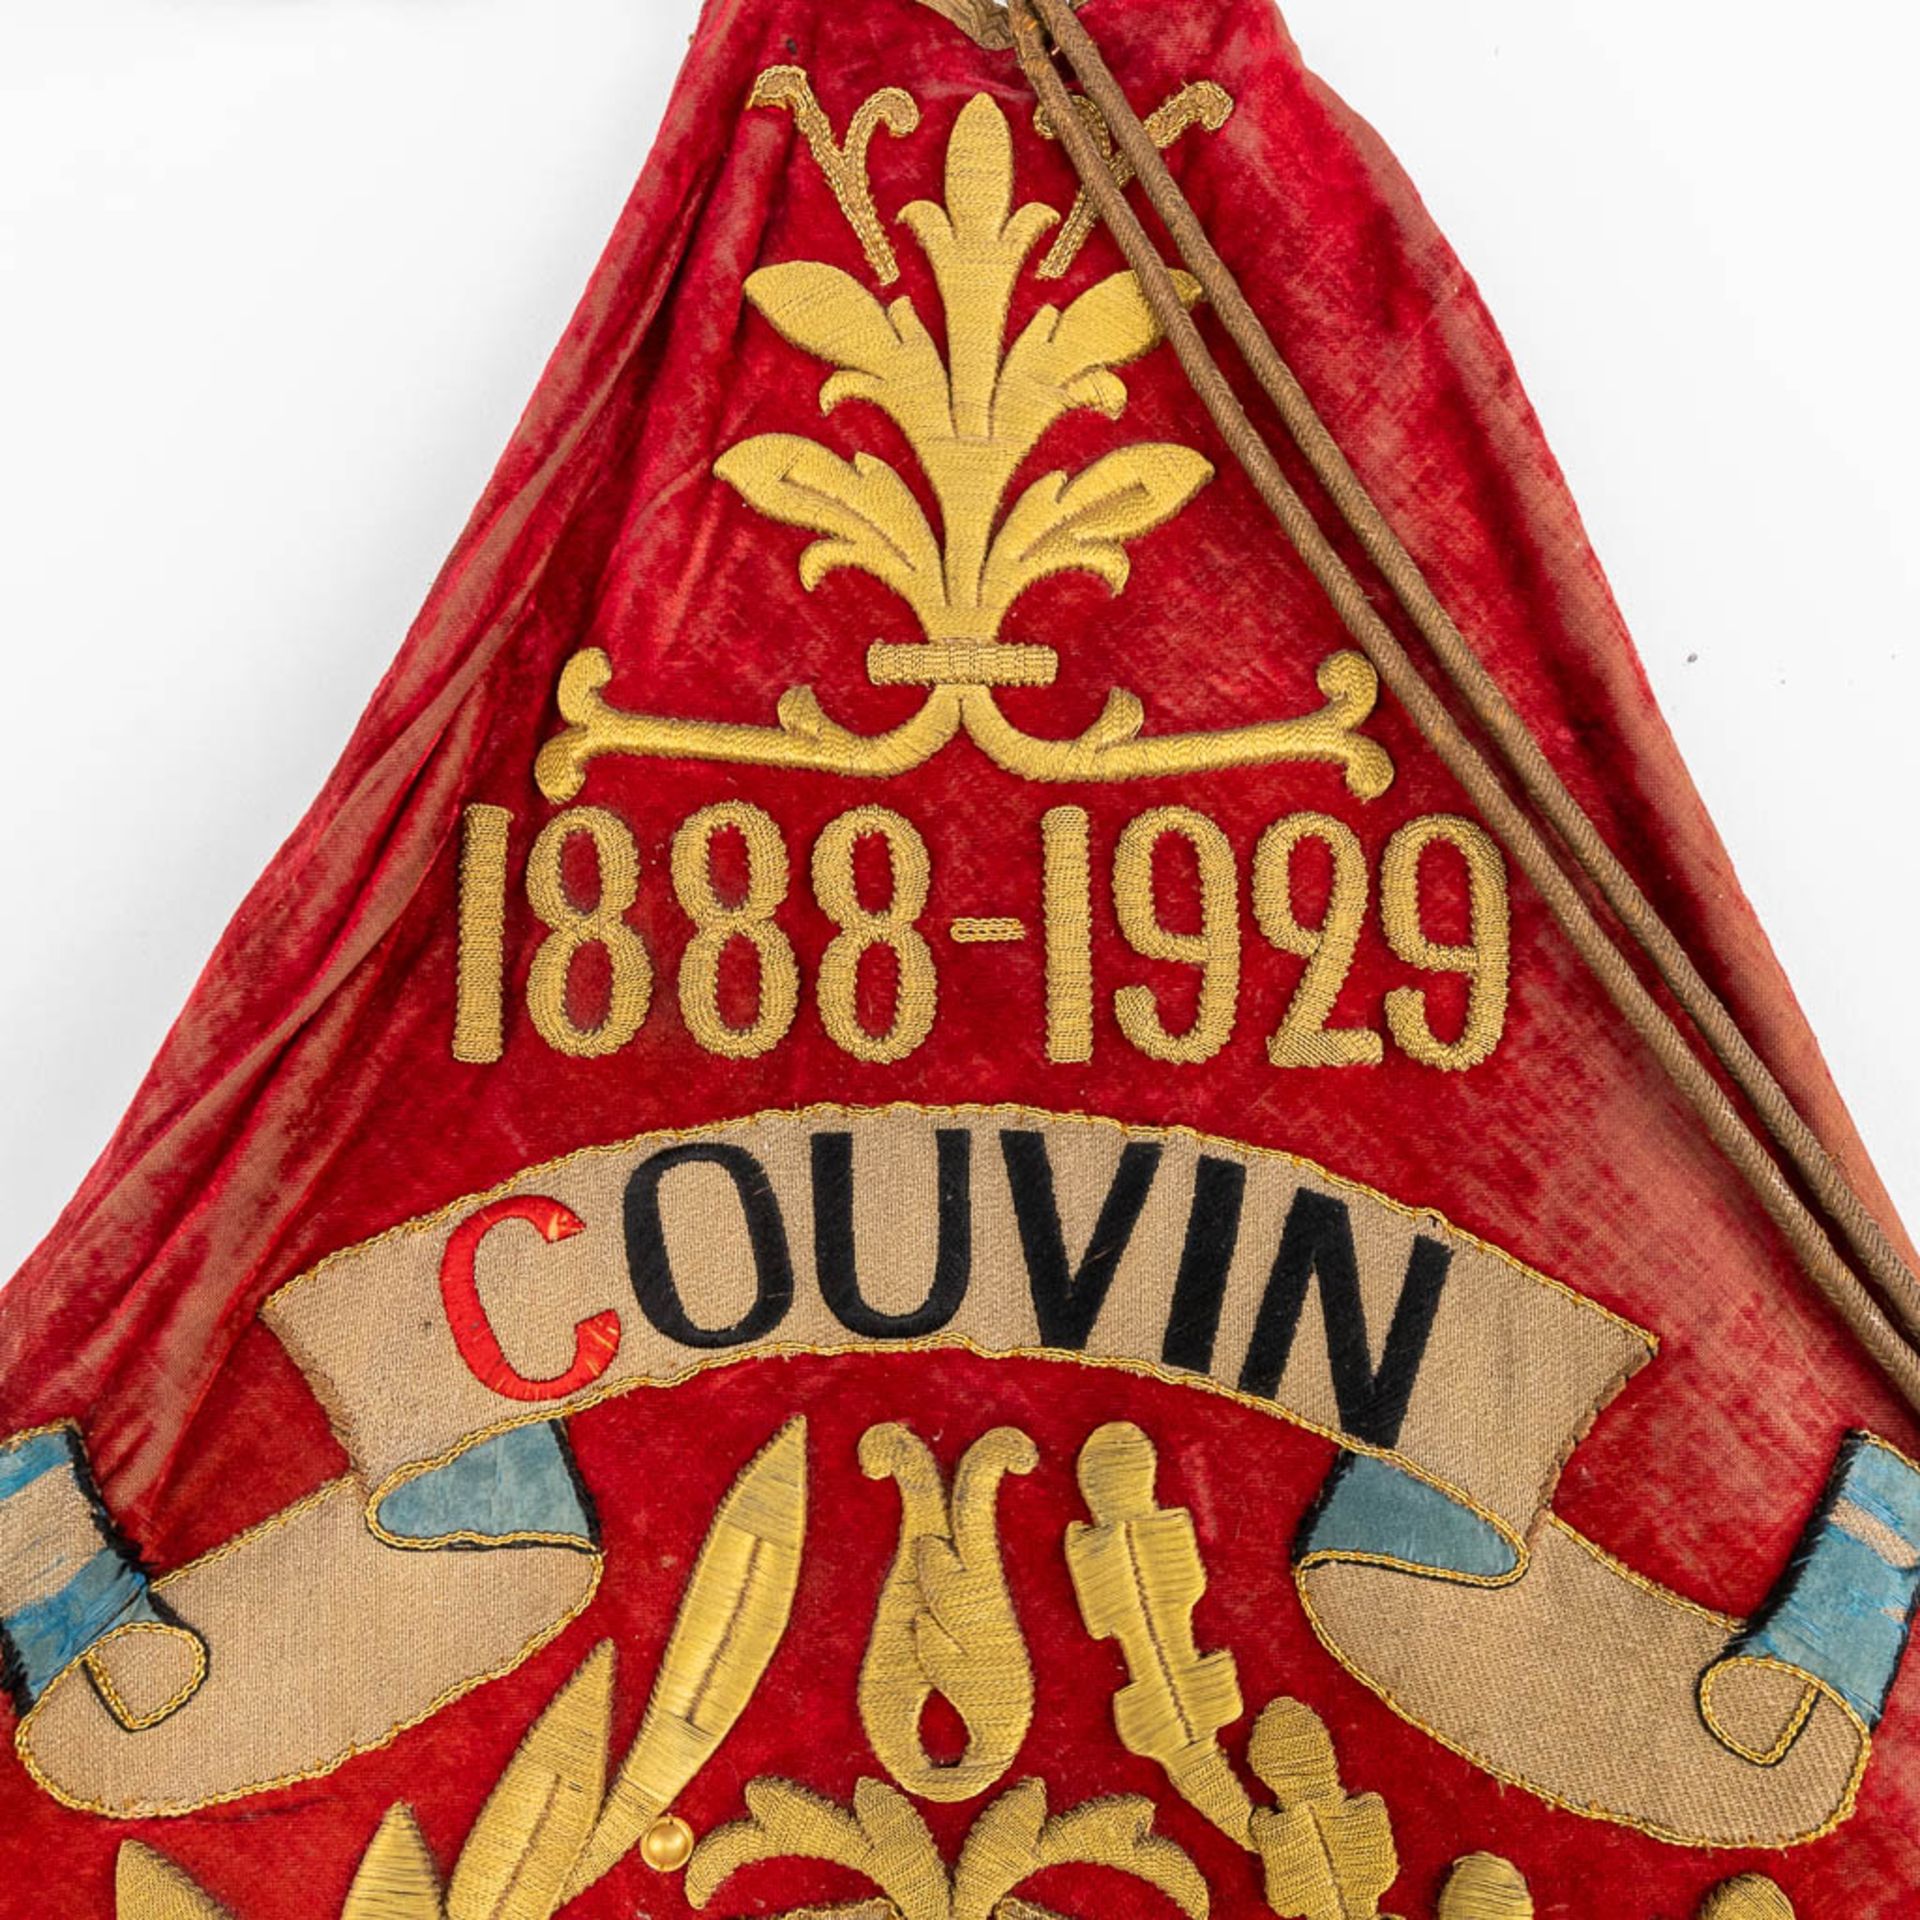 An antique banner, 'Harmonie Saint Germain, Couvin', and used in the front of a marching orchestra. - Image 7 of 10